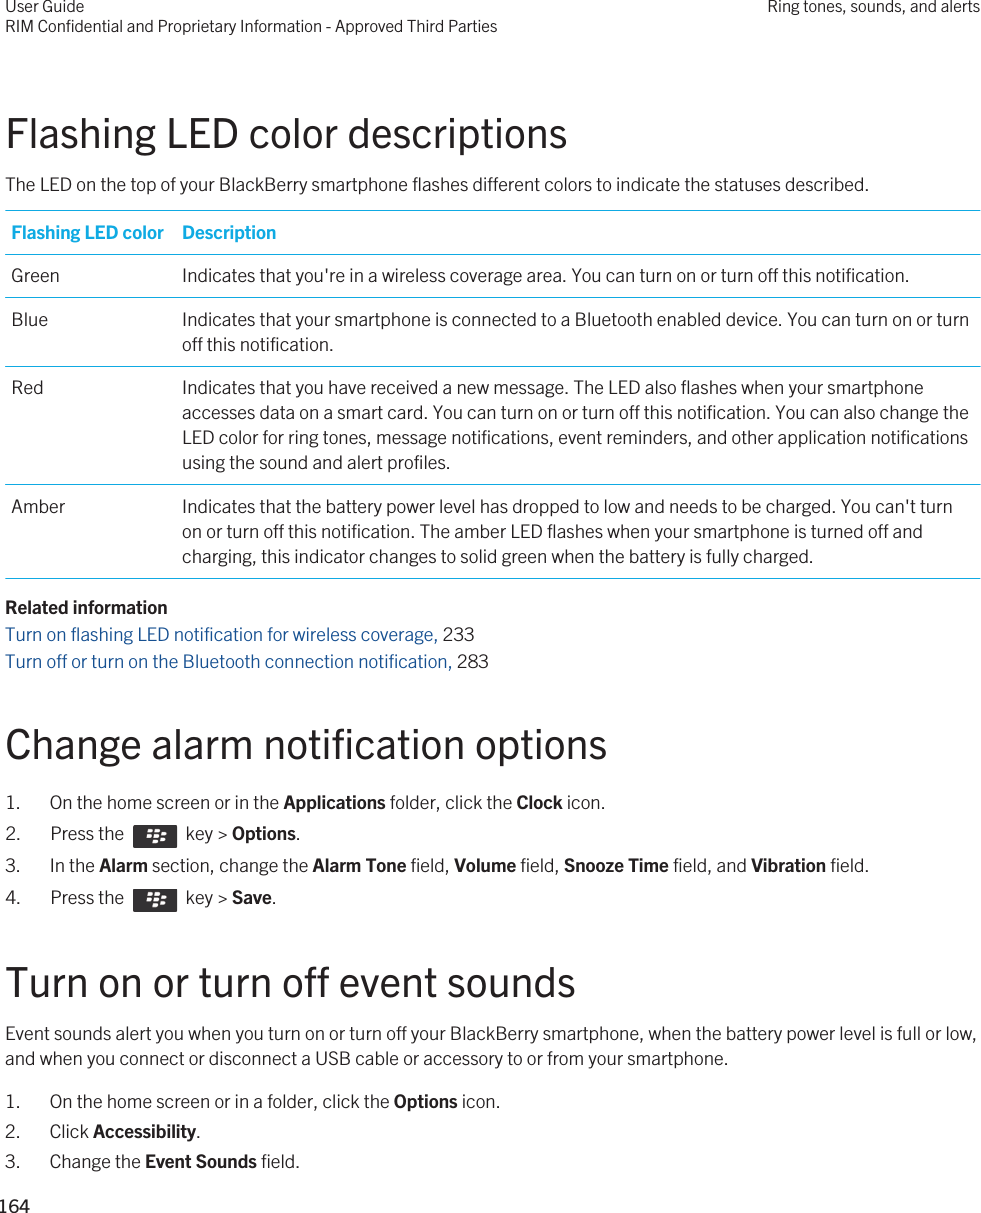 Flashing LED color descriptionsThe LED on the top of your BlackBerry smartphone flashes different colors to indicate the statuses described.Flashing LED color DescriptionGreen Indicates that you&apos;re in a wireless coverage area. You can turn on or turn off this notification.Blue Indicates that your smartphone is connected to a Bluetooth enabled device. You can turn on or turn off this notification.Red Indicates that you have received a new message. The LED also flashes when your smartphone accesses data on a smart card. You can turn on or turn off this notification. You can also change the LED color for ring tones, message notifications, event reminders, and other application notifications using the sound and alert profiles.Amber Indicates that the battery power level has dropped to low and needs to be charged. You can&apos;t turn on or turn off this notification. The amber LED flashes when your smartphone is turned off and charging, this indicator changes to solid green when the battery is fully charged.Related informationTurn on flashing LED notification for wireless coverage, 233Turn off or turn on the Bluetooth connection notification, 283Change alarm notification options1. On the home screen or in the Applications folder, click the Clock icon.2.  Press the    key &gt; Options. 3. In the Alarm section, change the Alarm Tone field, Volume field, Snooze Time field, and Vibration field.4.  Press the    key &gt; Save. Turn on or turn off event soundsEvent sounds alert you when you turn on or turn off your BlackBerry smartphone, when the battery power level is full or low, and when you connect or disconnect a USB cable or accessory to or from your smartphone.1. On the home screen or in a folder, click the Options icon.2. Click Accessibility.3. Change the Event Sounds field.User GuideRIM Confidential and Proprietary Information - Approved Third PartiesRing tones, sounds, and alerts164 